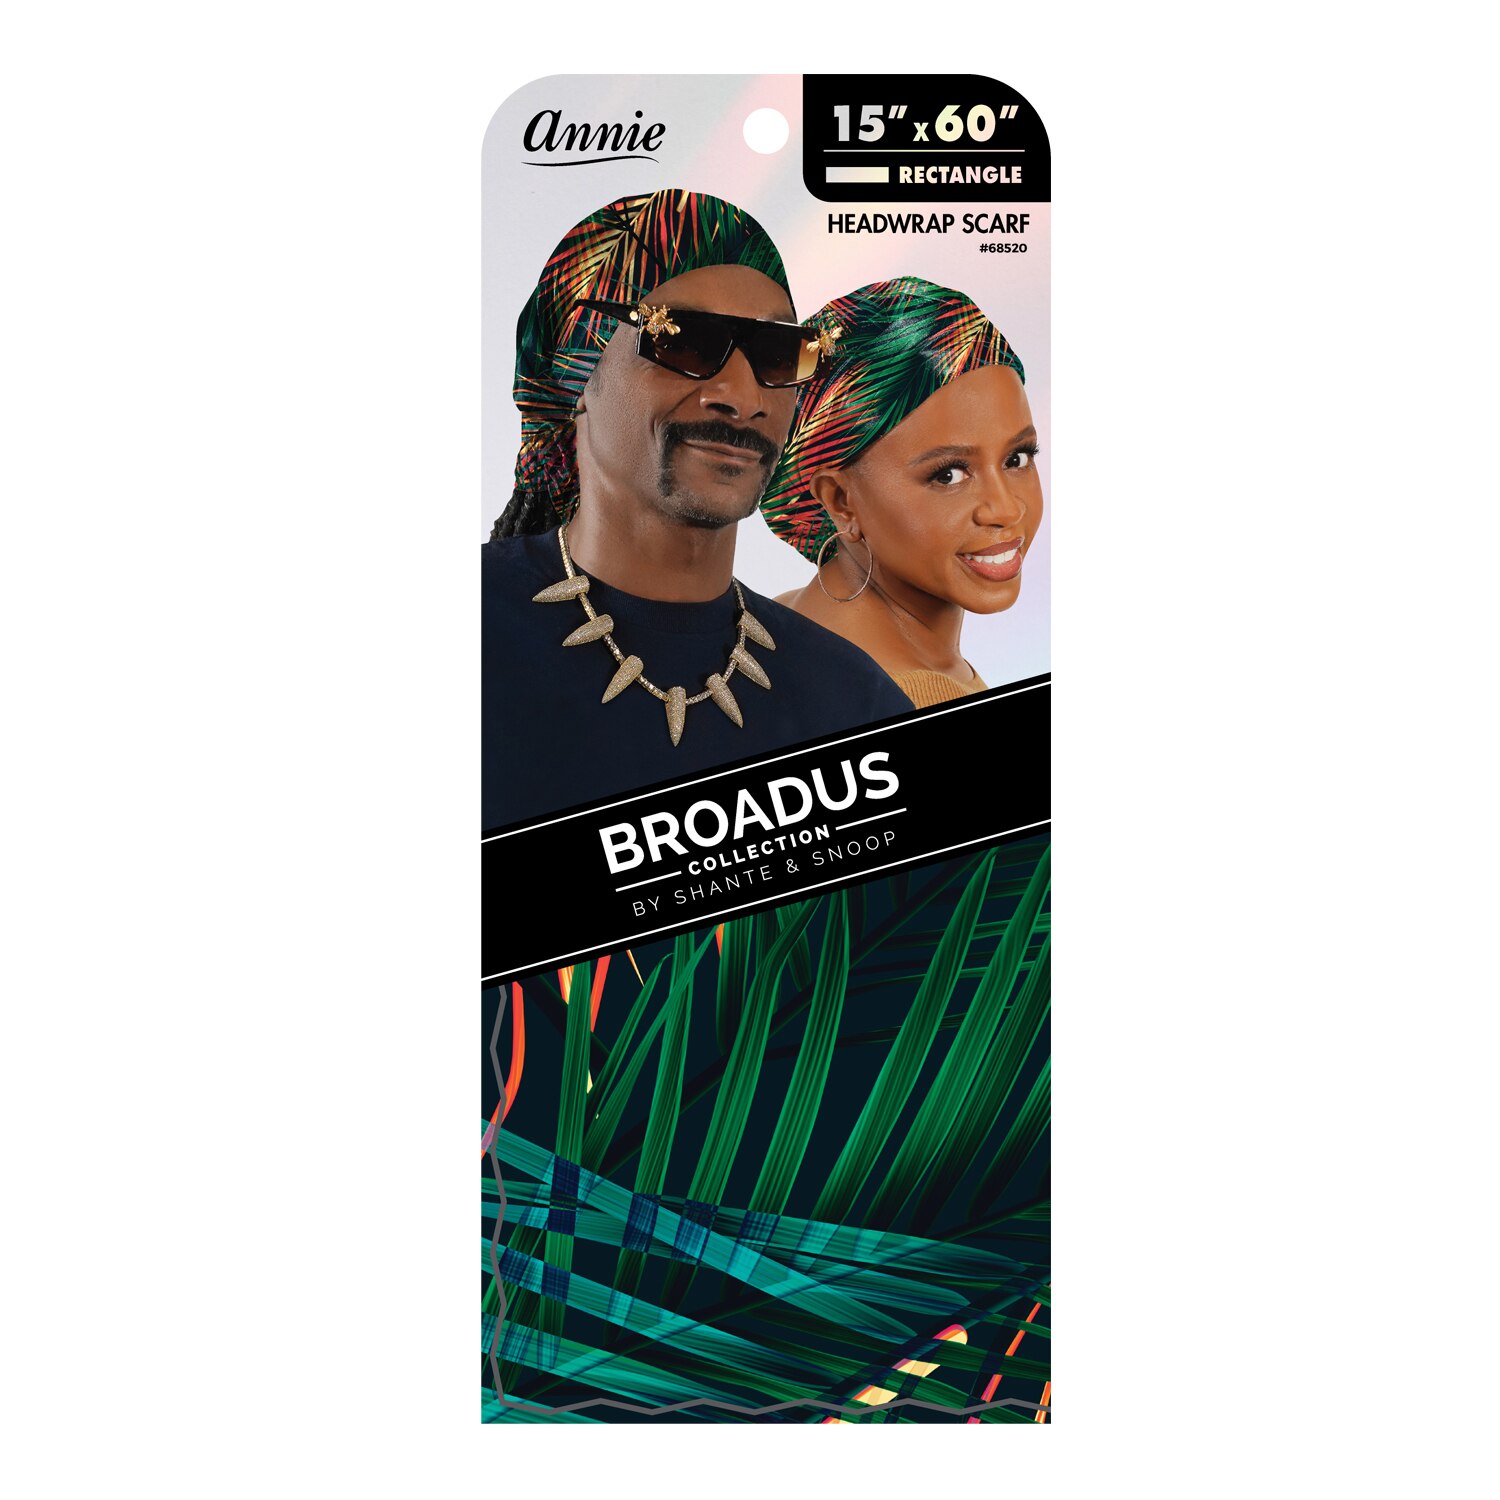 Annie Broadus Collection Headwrap Scarf, Island Palm, 60 In. X 15 In. , CVS